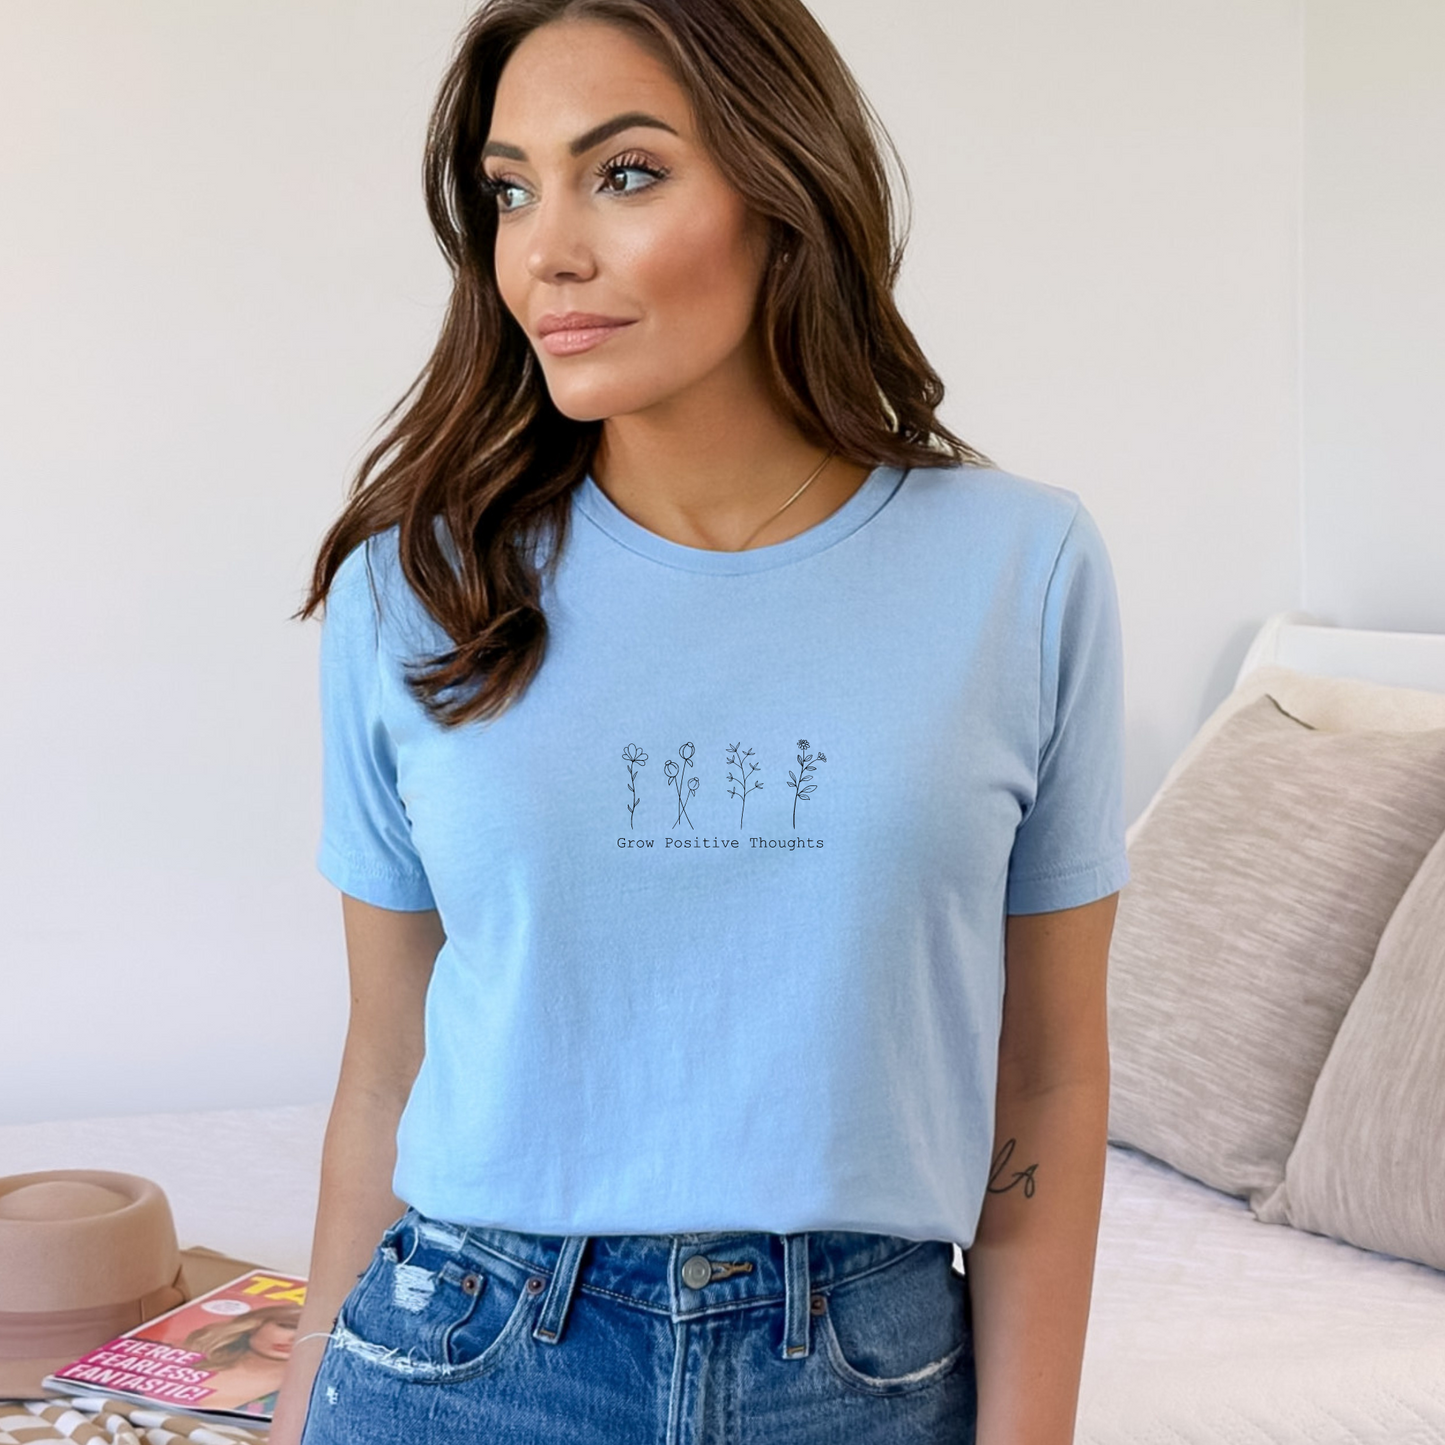 Grow Positive Thoughts and Blooms Unisex, Bella+Canvas Graphic Tee